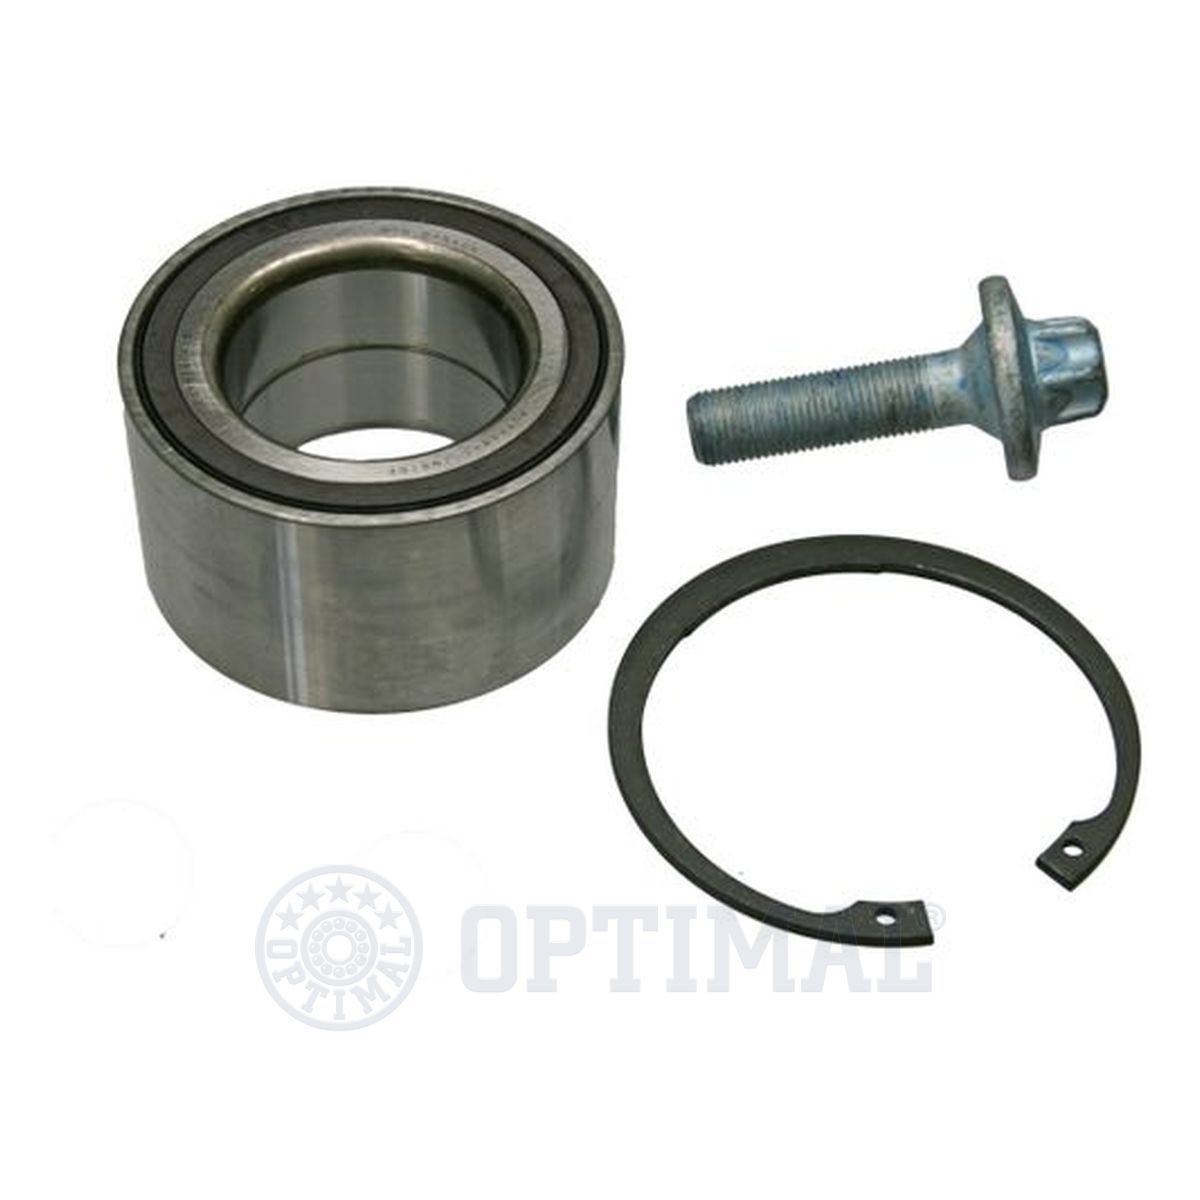 Wheel Bearing Front 2219810406 Meyle for Mercedes-Benz Brand New Premium Quality